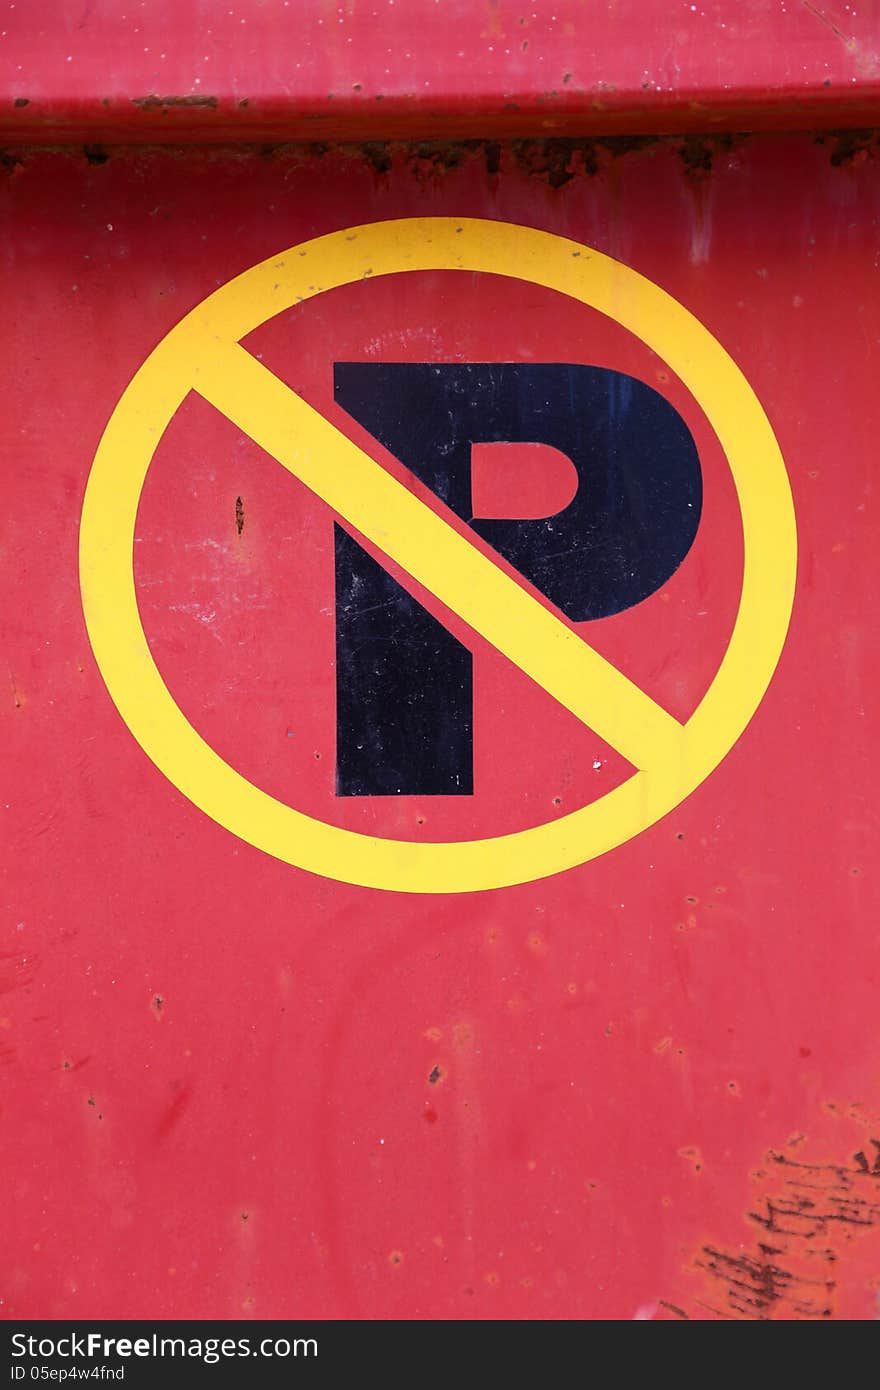 Yellow and black no parking sign on red metal.